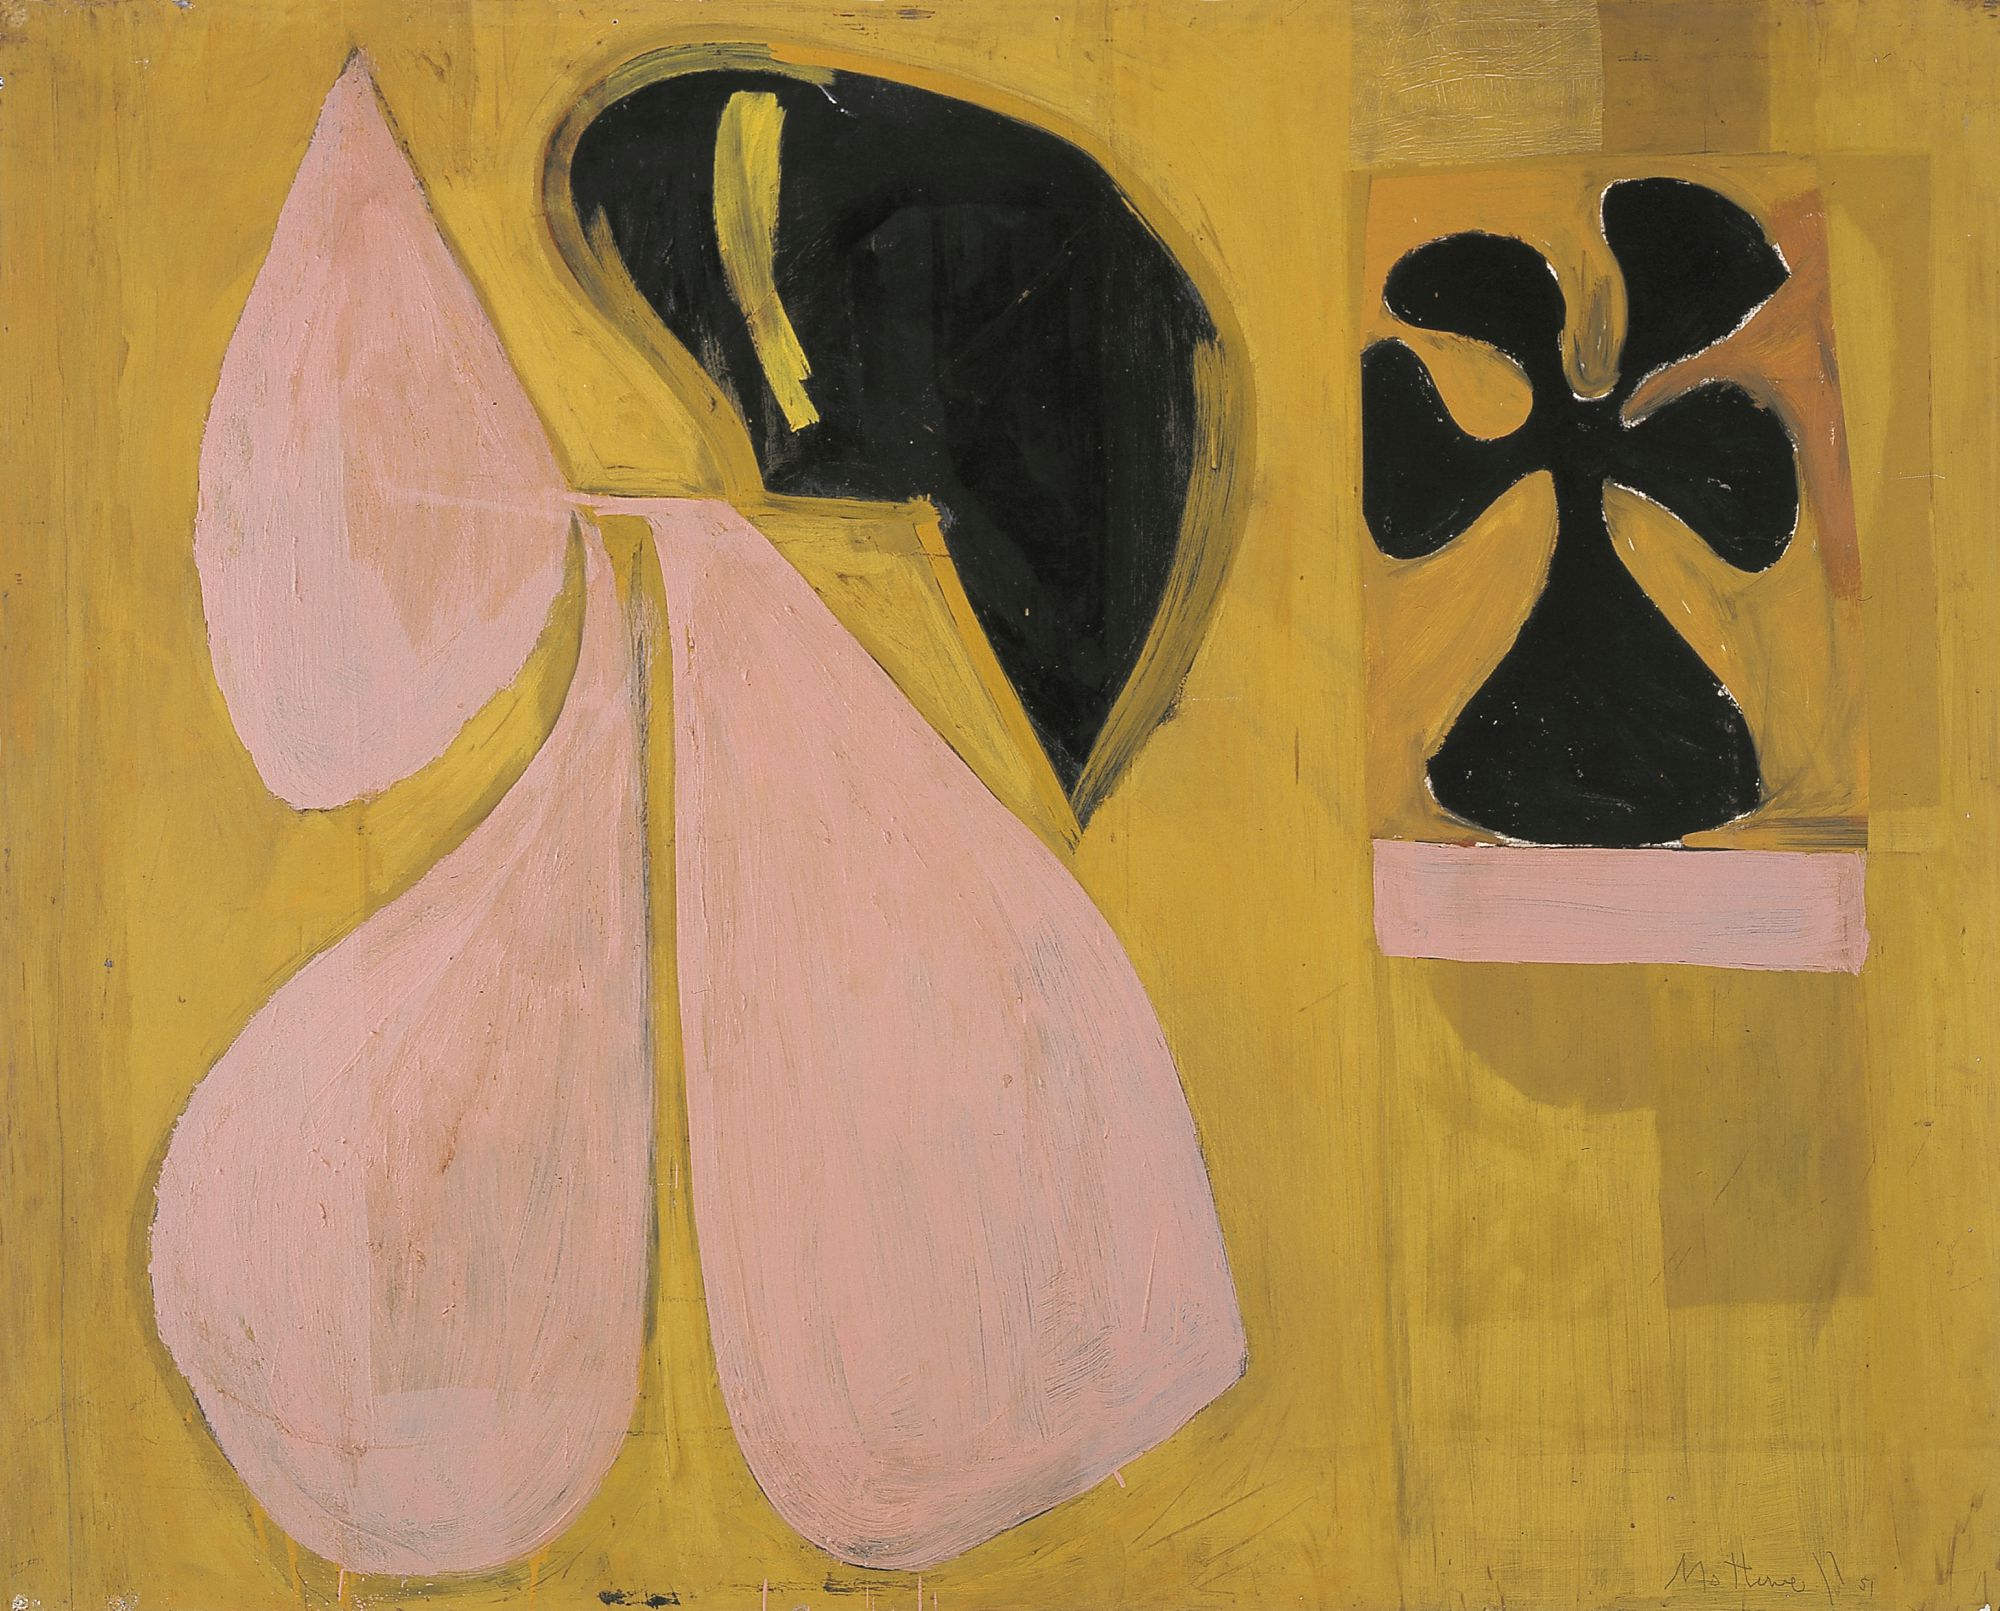 Interior with Pink Nude, 1951, oil on Masonite, 44 ✕ 55 in. (111.8 ✕ 139.7 cm)